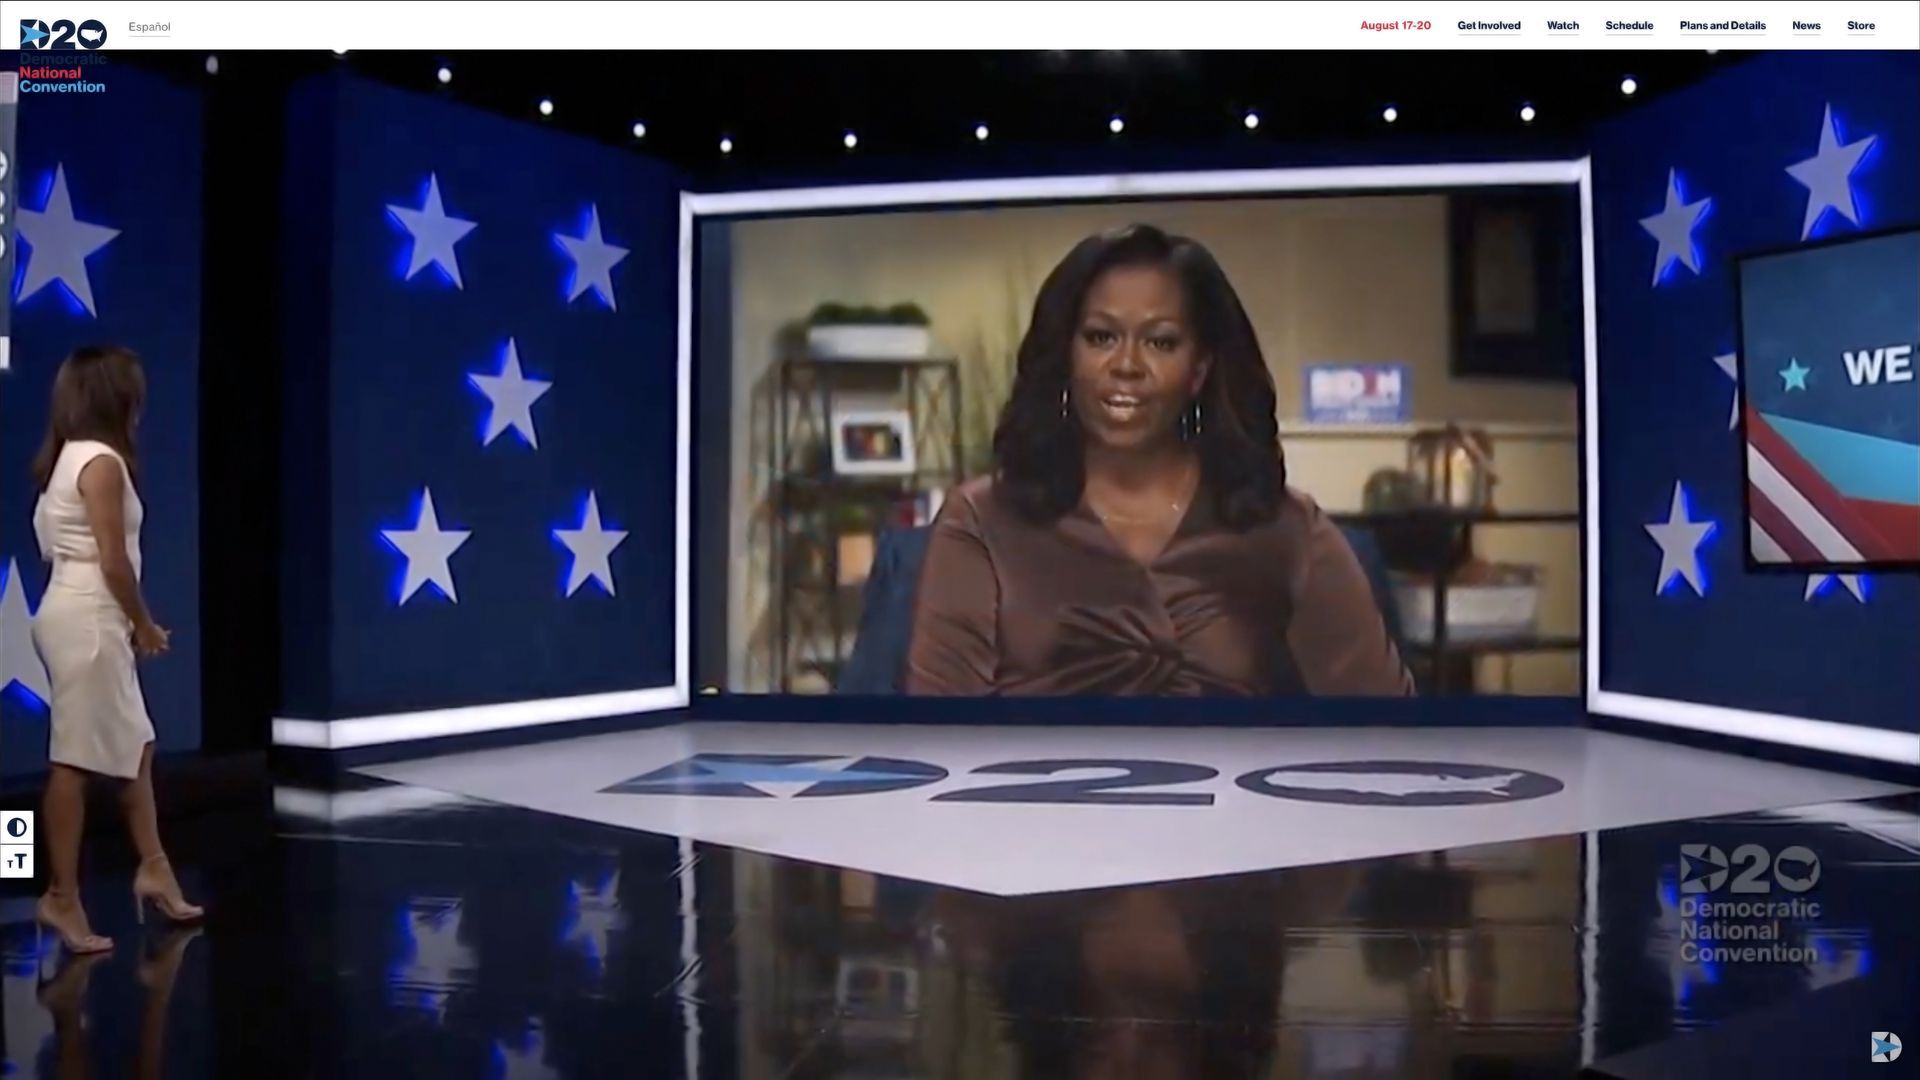 Screenshot of Michelle Obama speaking at the DNC convention 